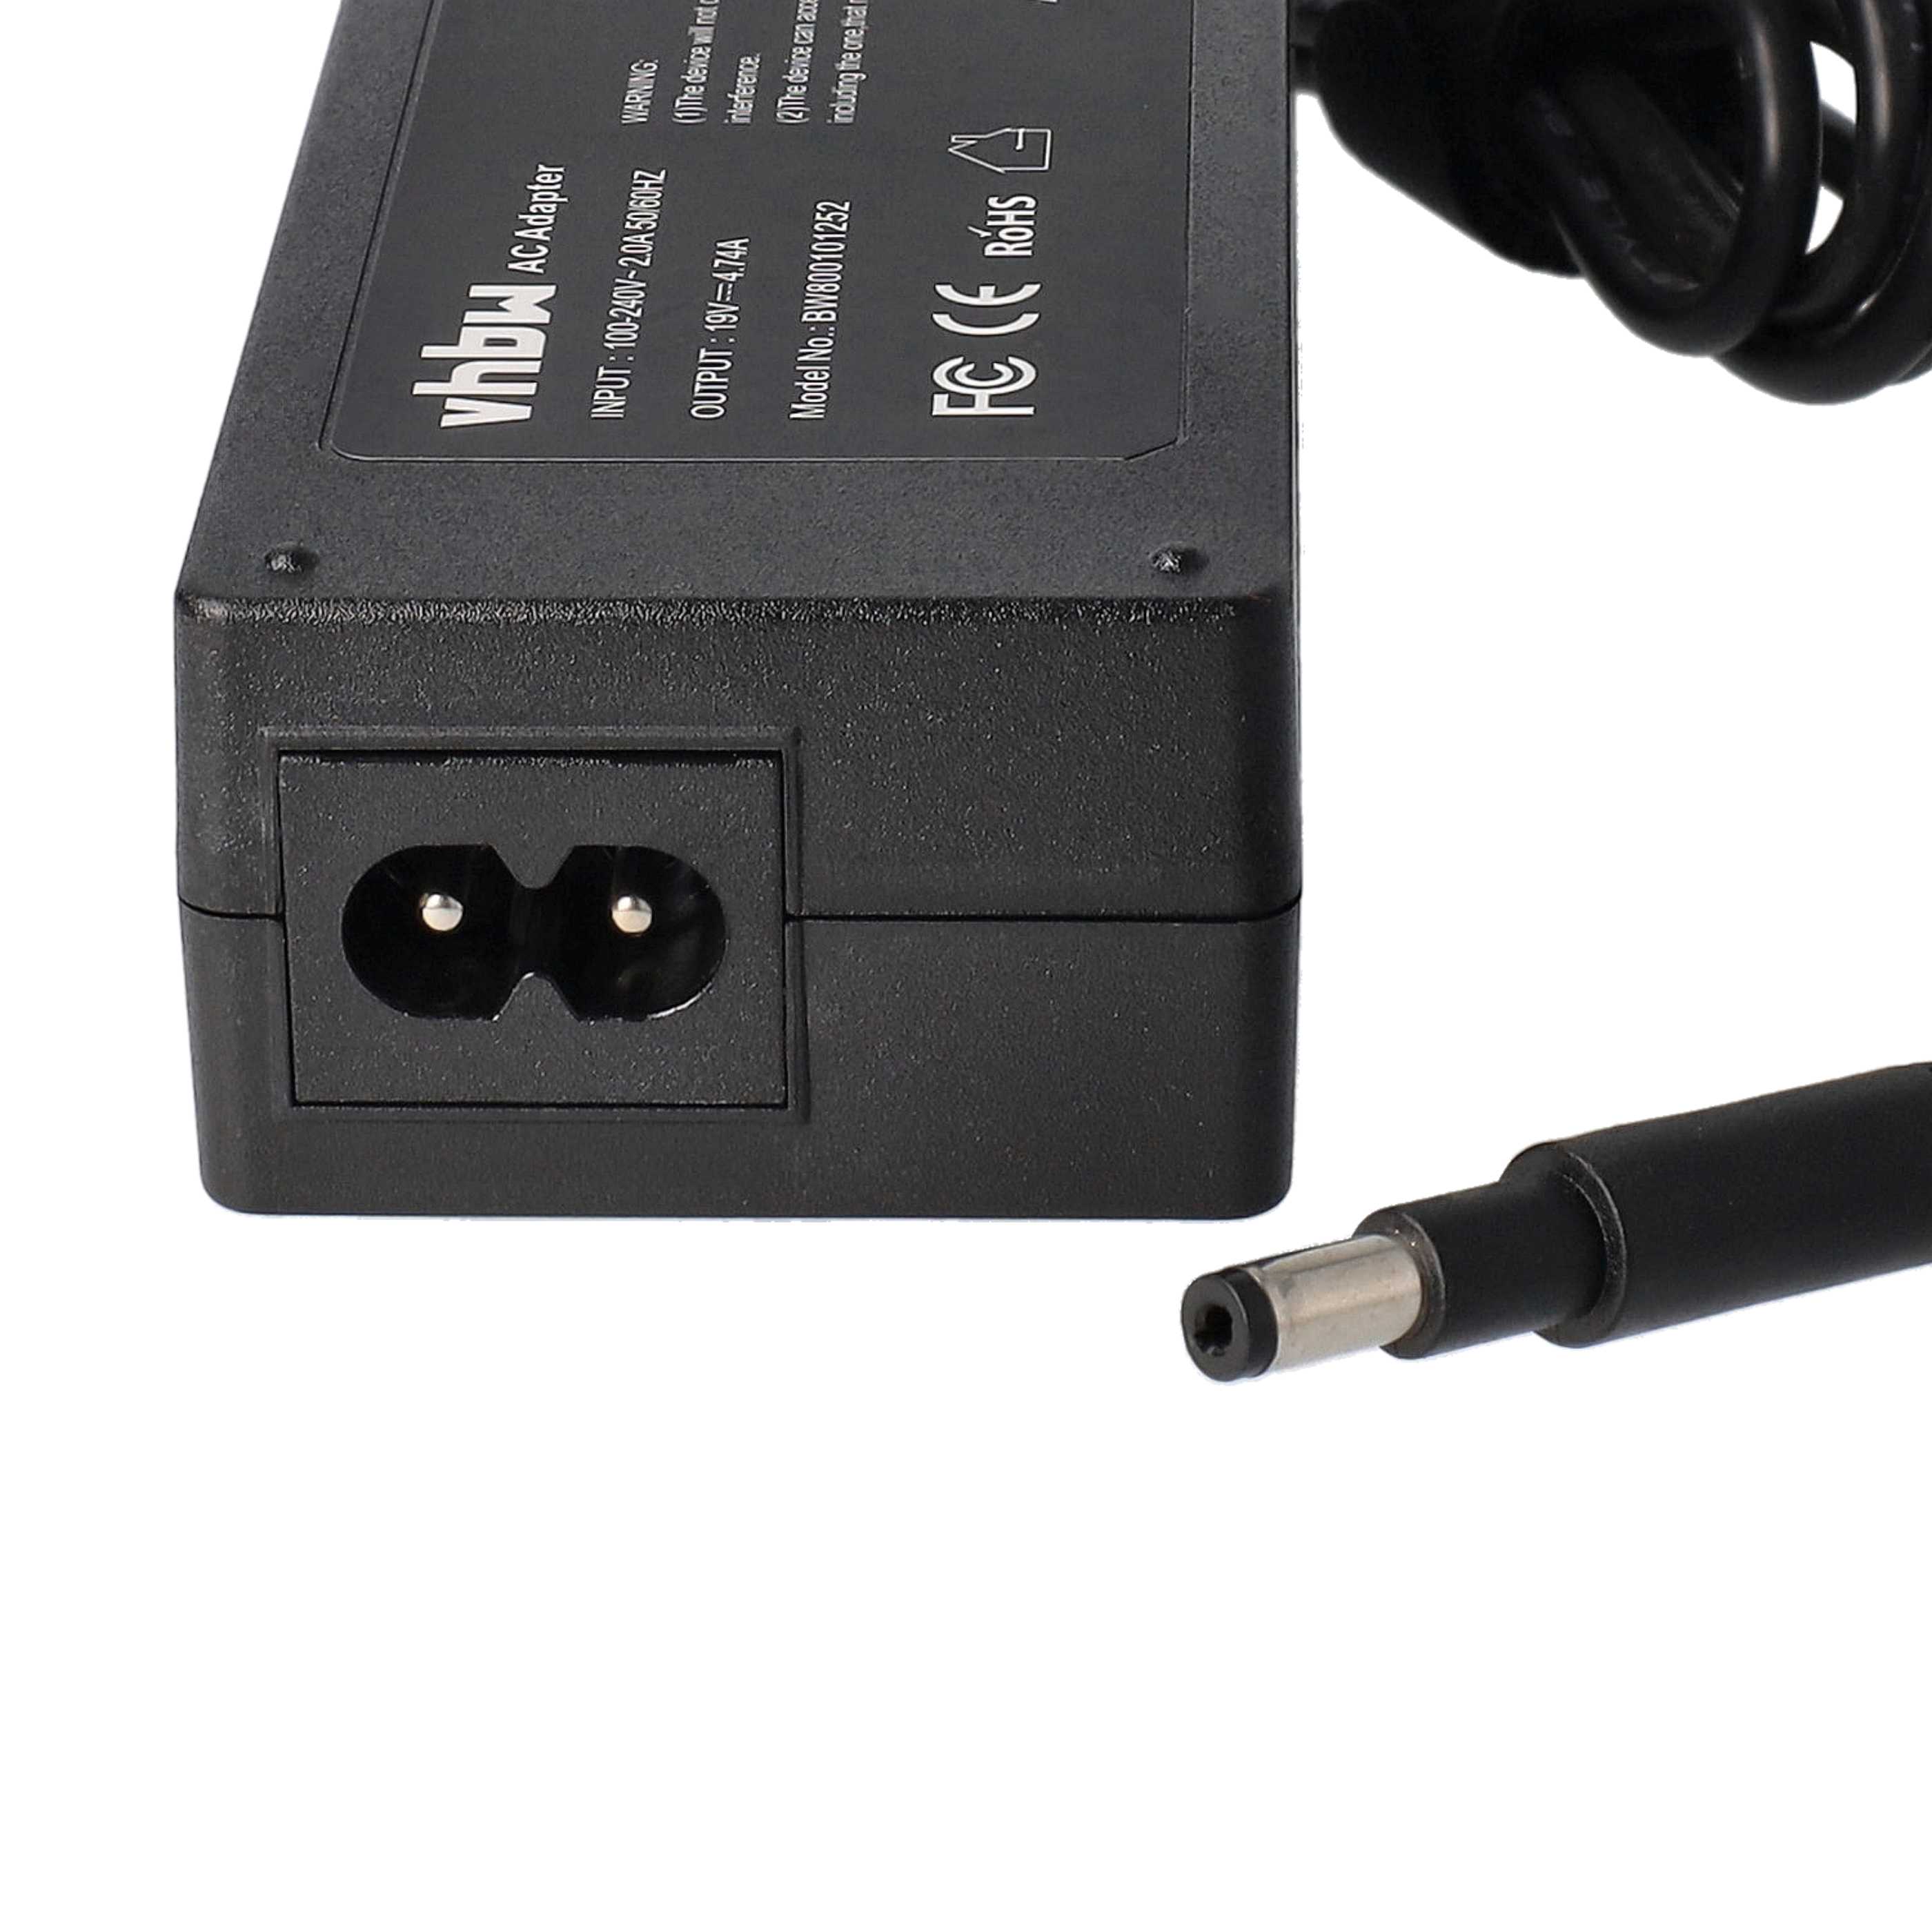 Mains Power Adapter replaces HP 239428-001, 239705-001, 287515-001, 239428-002 for HPNotebook etc., 90 W